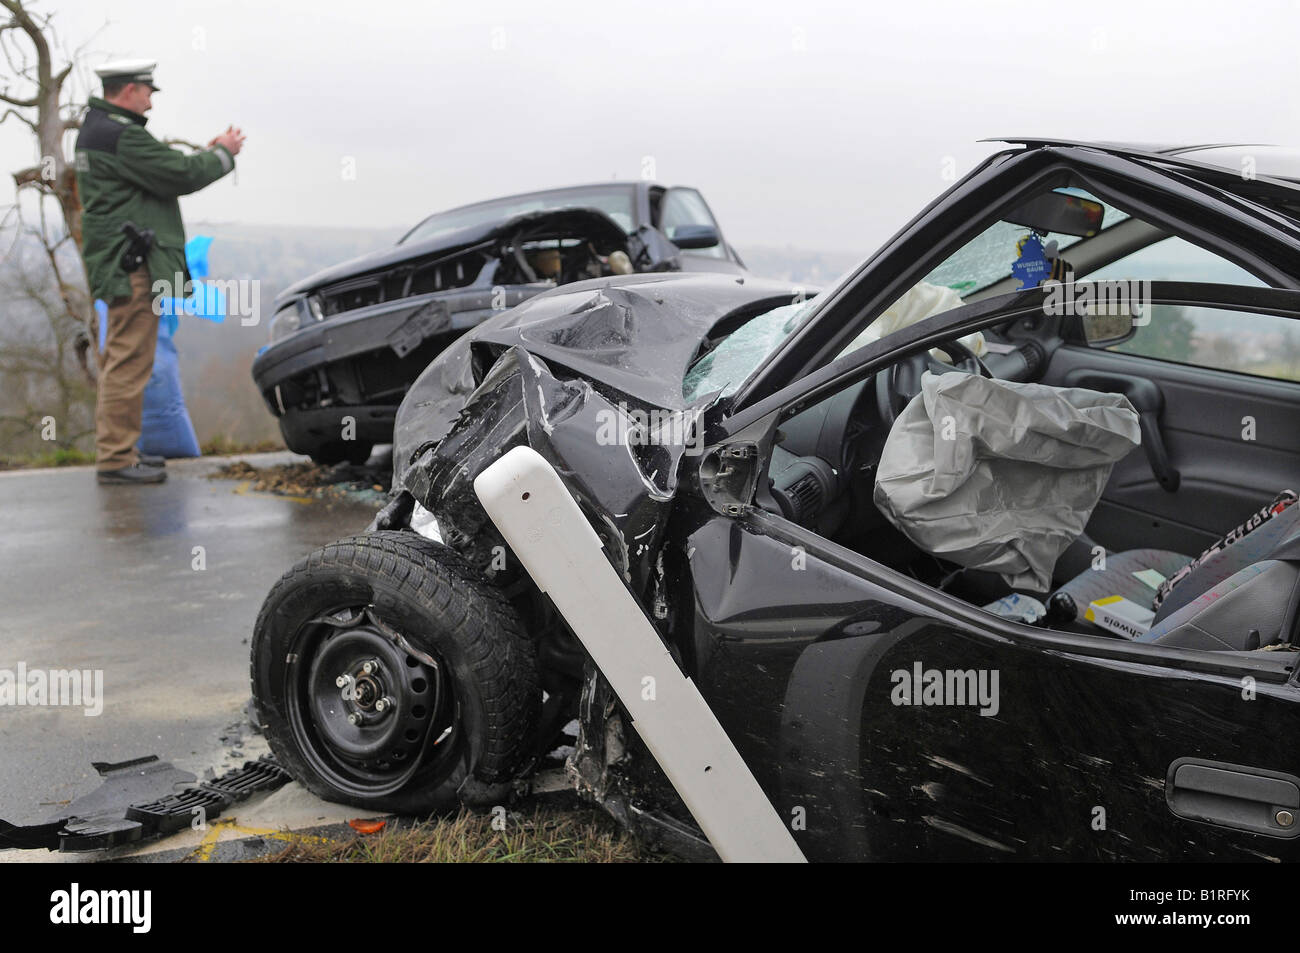 Police officer photographing car wrecks after a car accident for the acquisition of accident data, Nuertingen, Esslingen Region Stock Photo